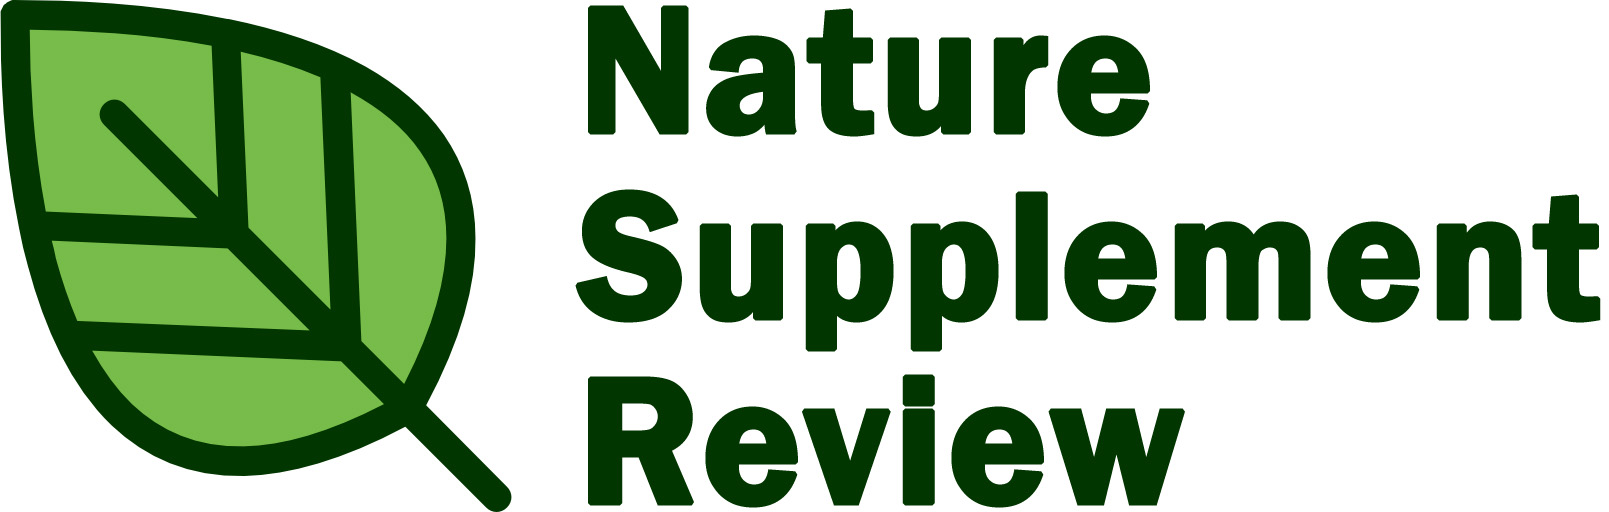 Nature Supplement Review